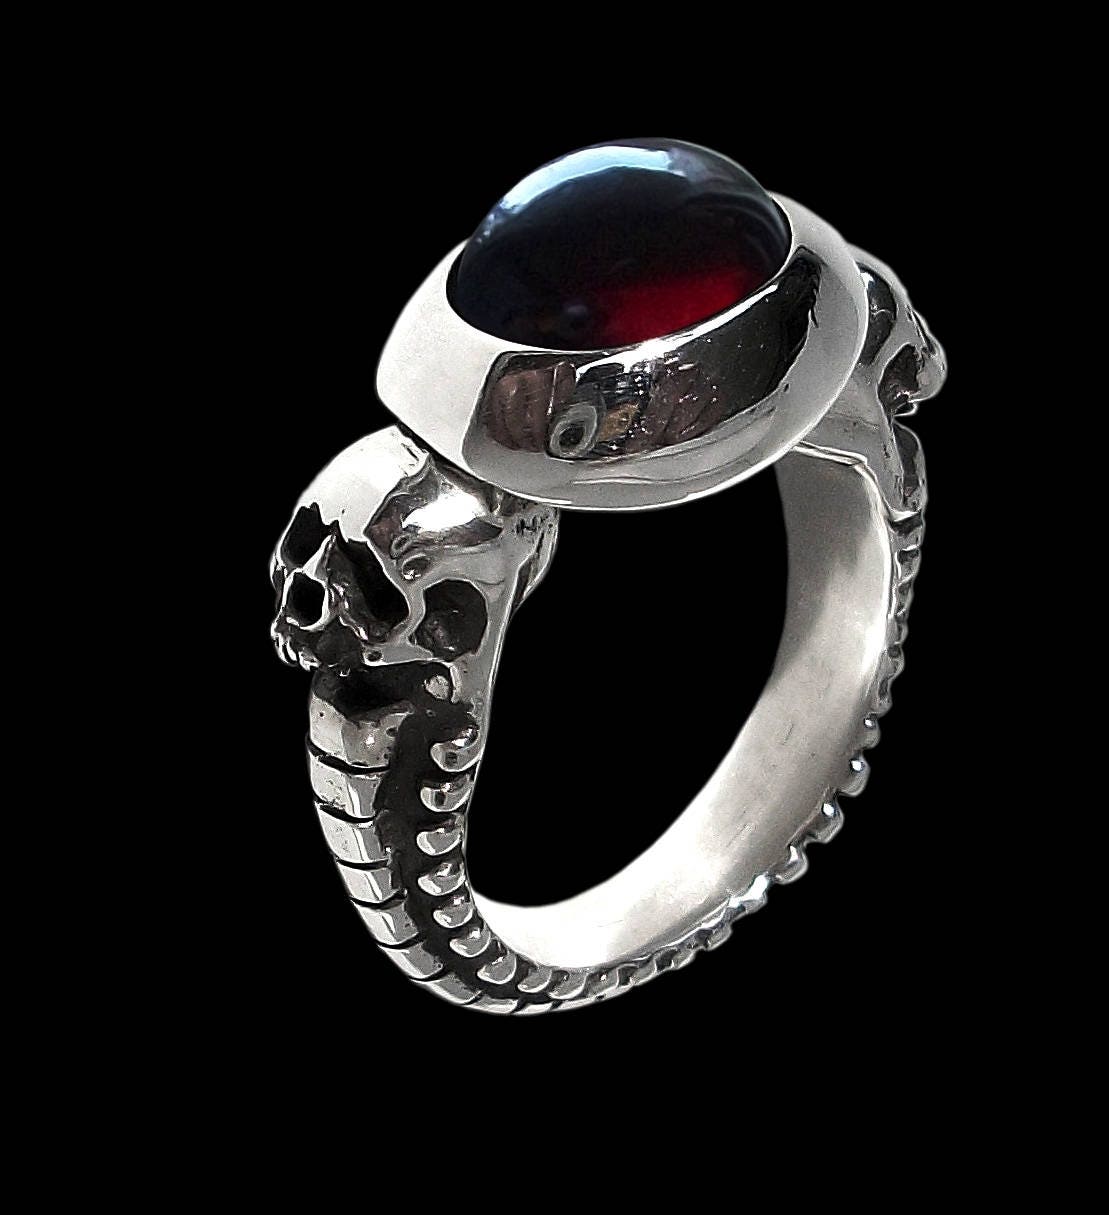 Skull engagement ring - Sterling Silver Engagement Skulls Ring Love To Death with Red Garnet - Inspired by HR Giger artwork